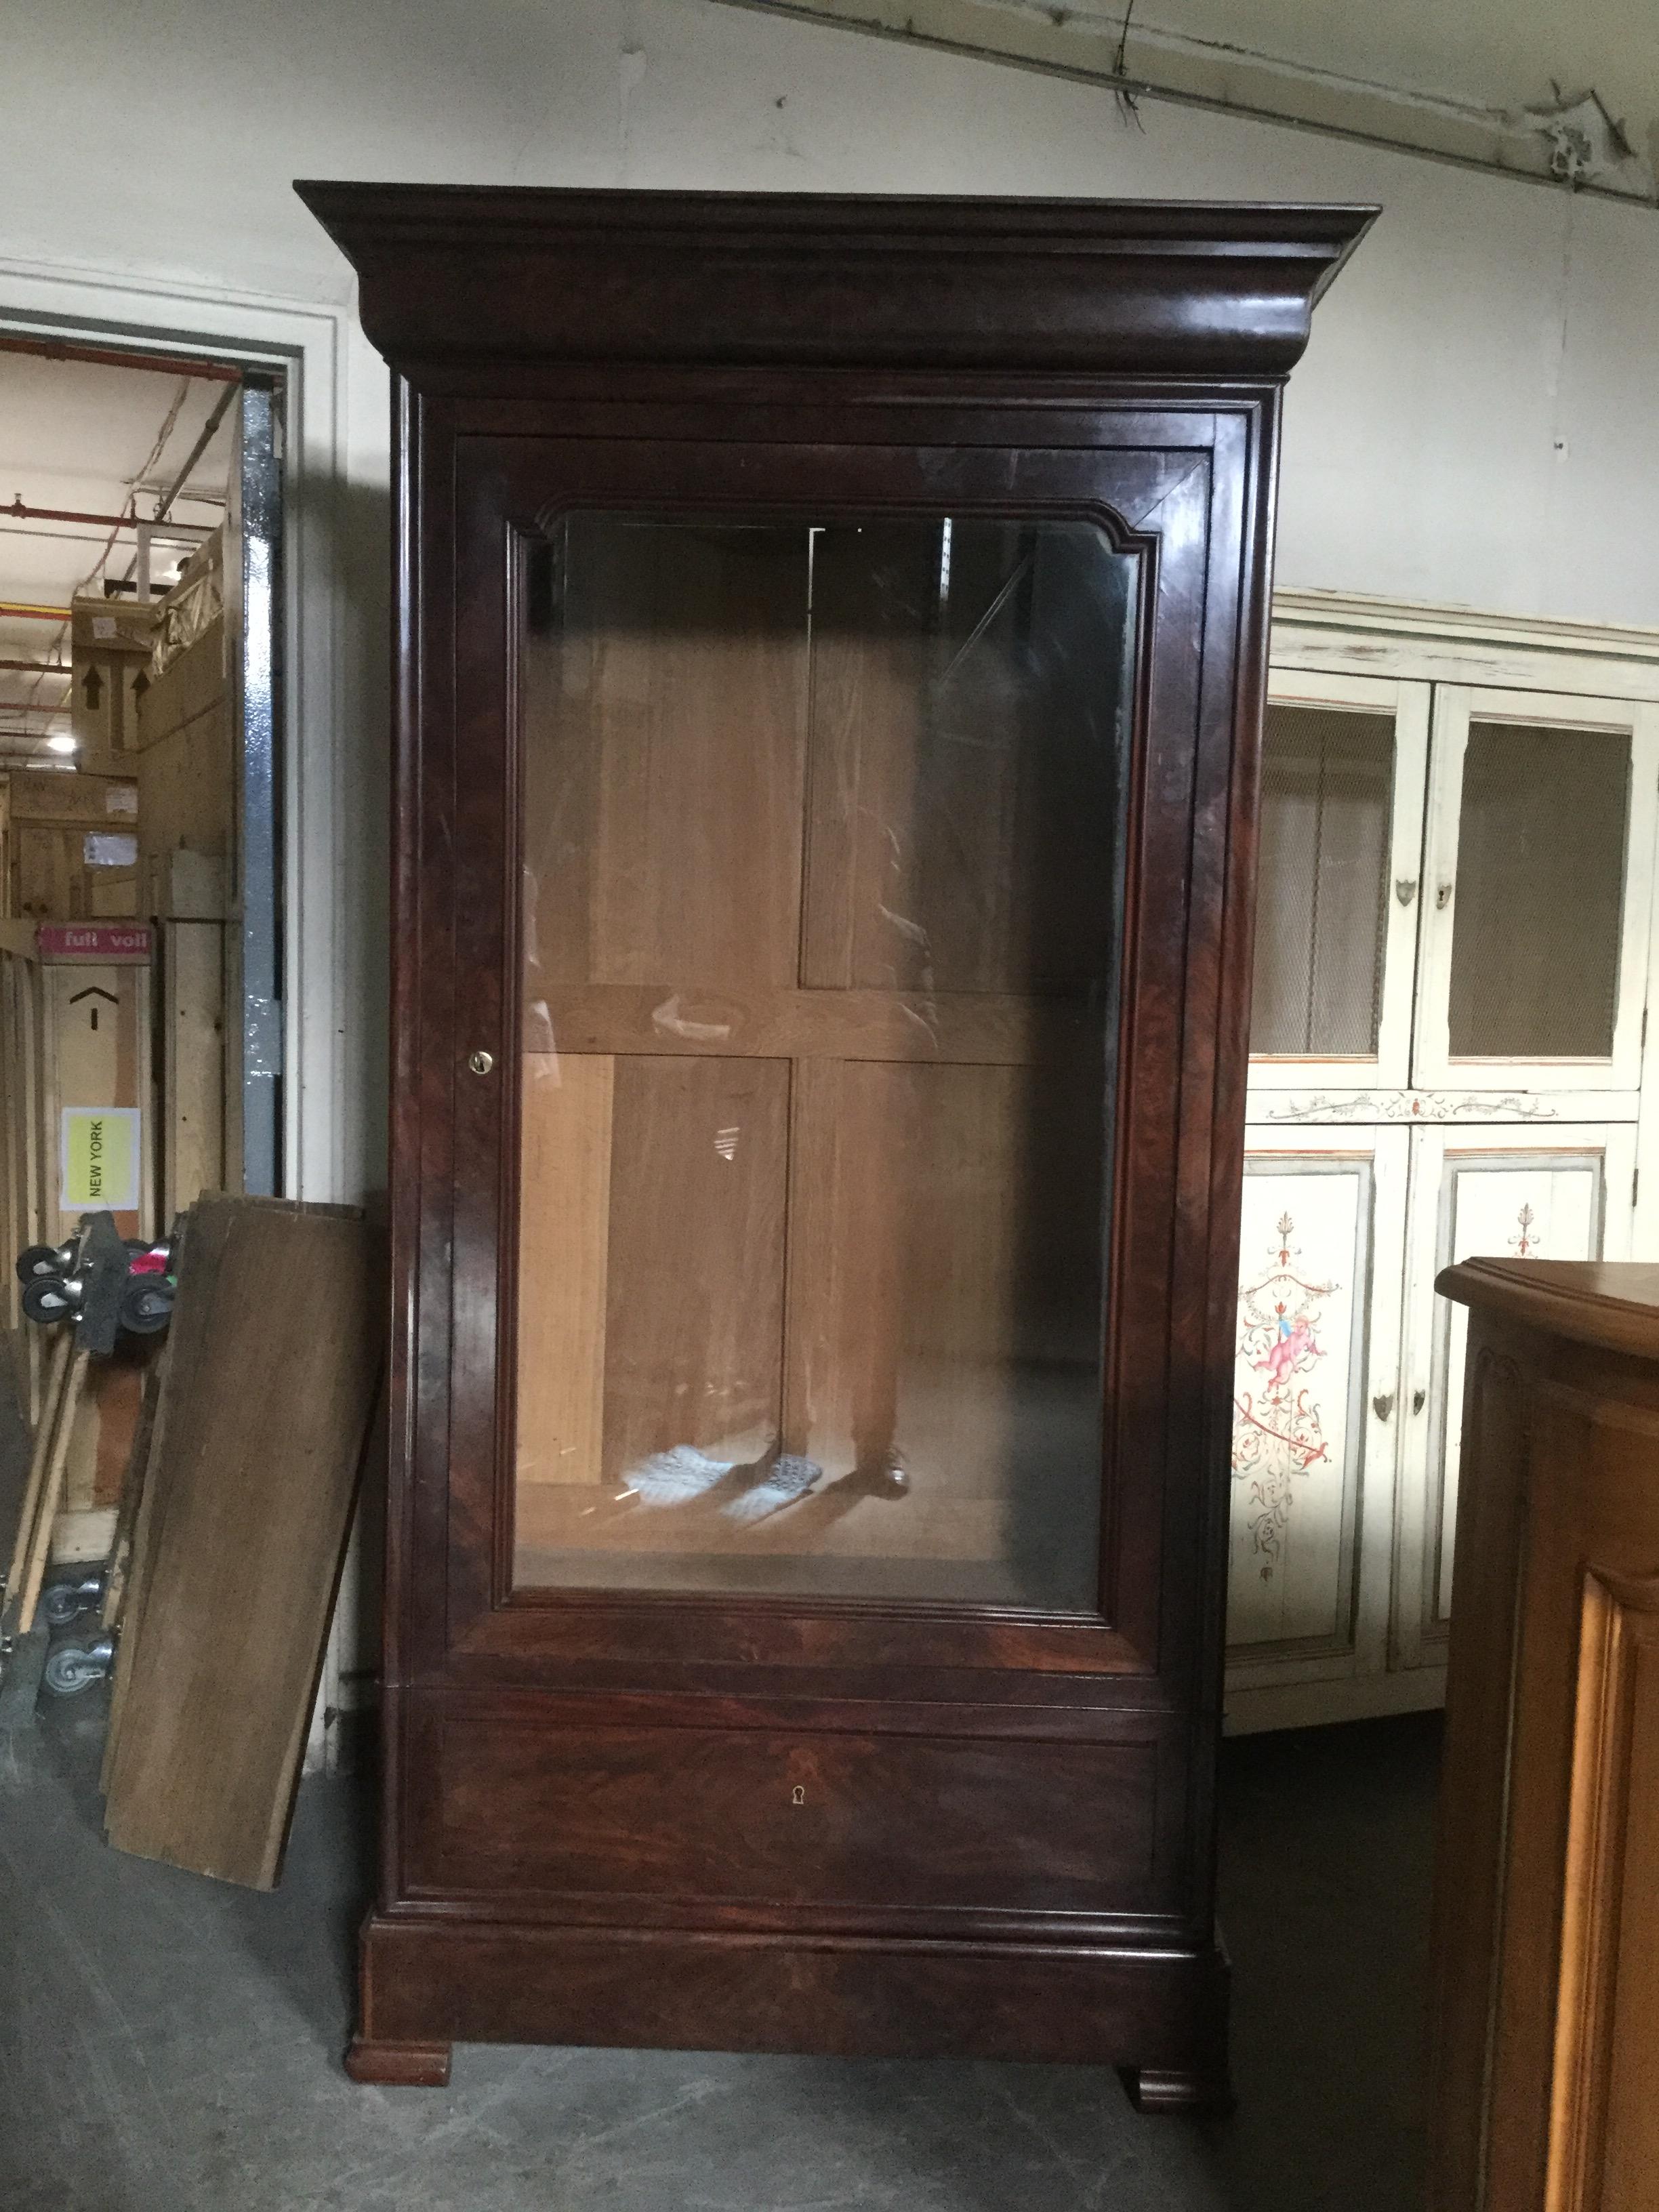 This 19th century Louis-Philippe flame mahogany armoire features a glass door, 3 adjustable shelves and 2 bottom drawers for additional storage. With clean, straight lines, this armoire/bookcase works well in any contemporary interior. Original lock